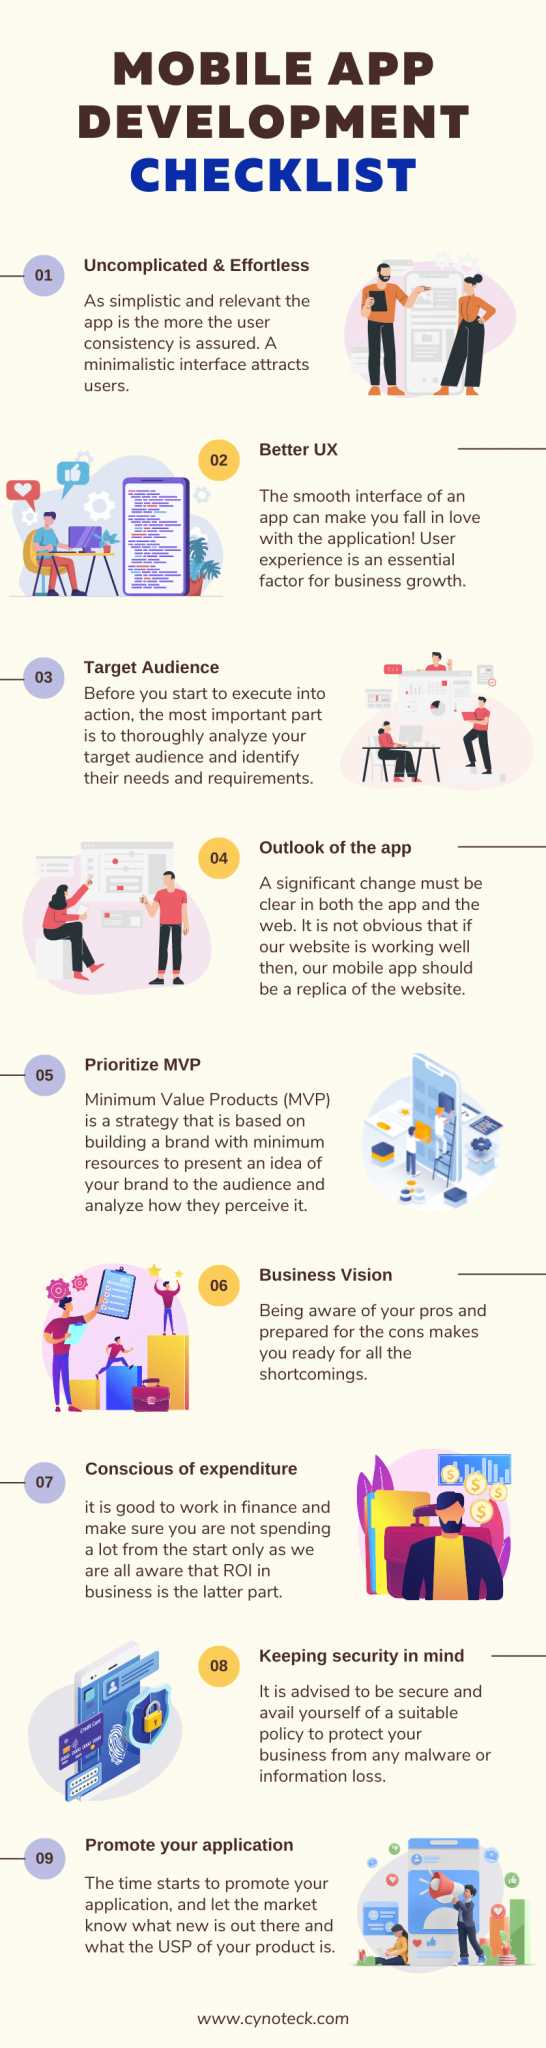 The Complete Mobile App Development Checklist for Small businesses